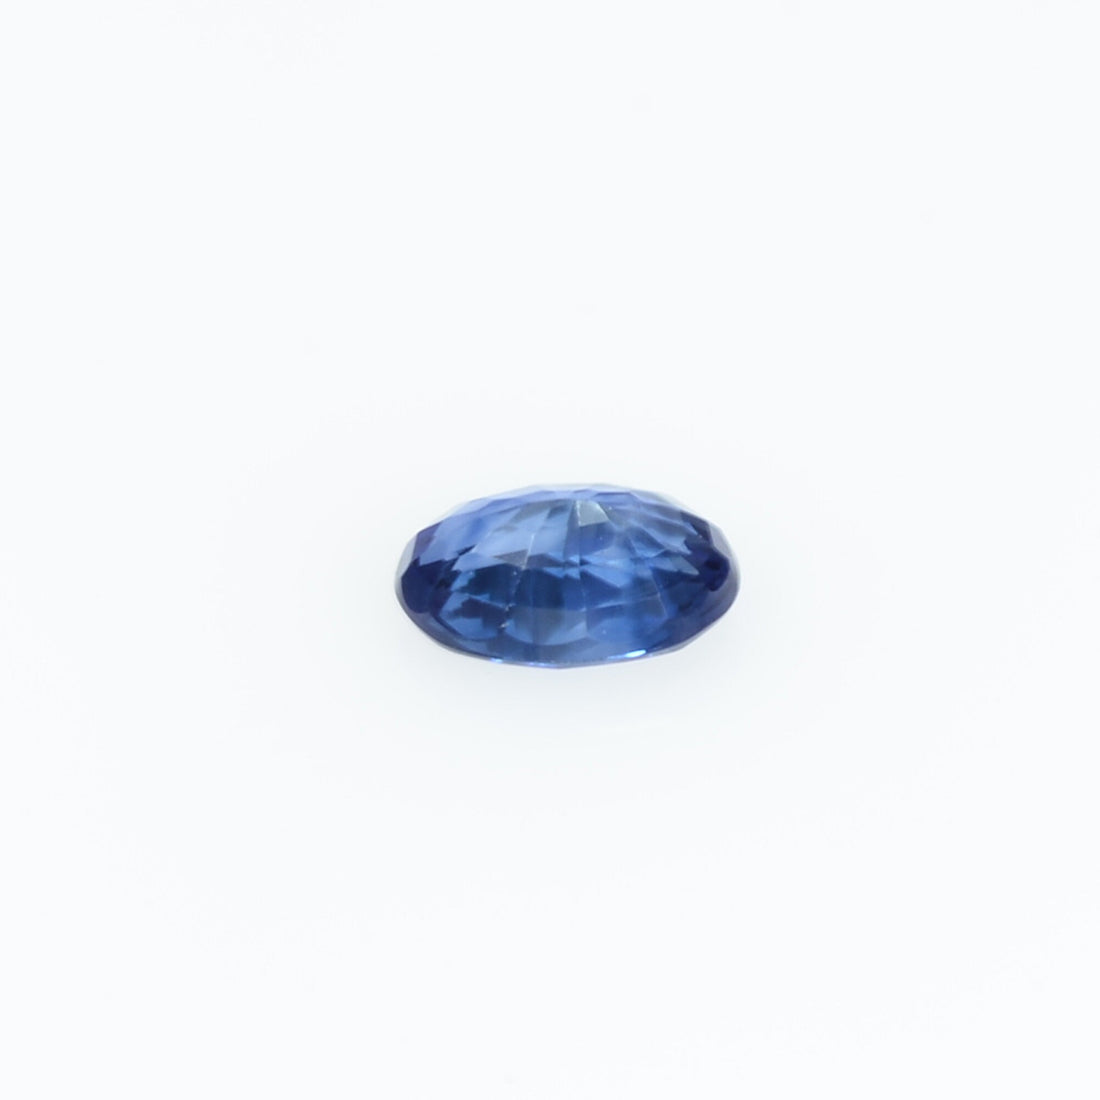 0.31 Cts Natural Blue Sapphire loose gemstone oval cut